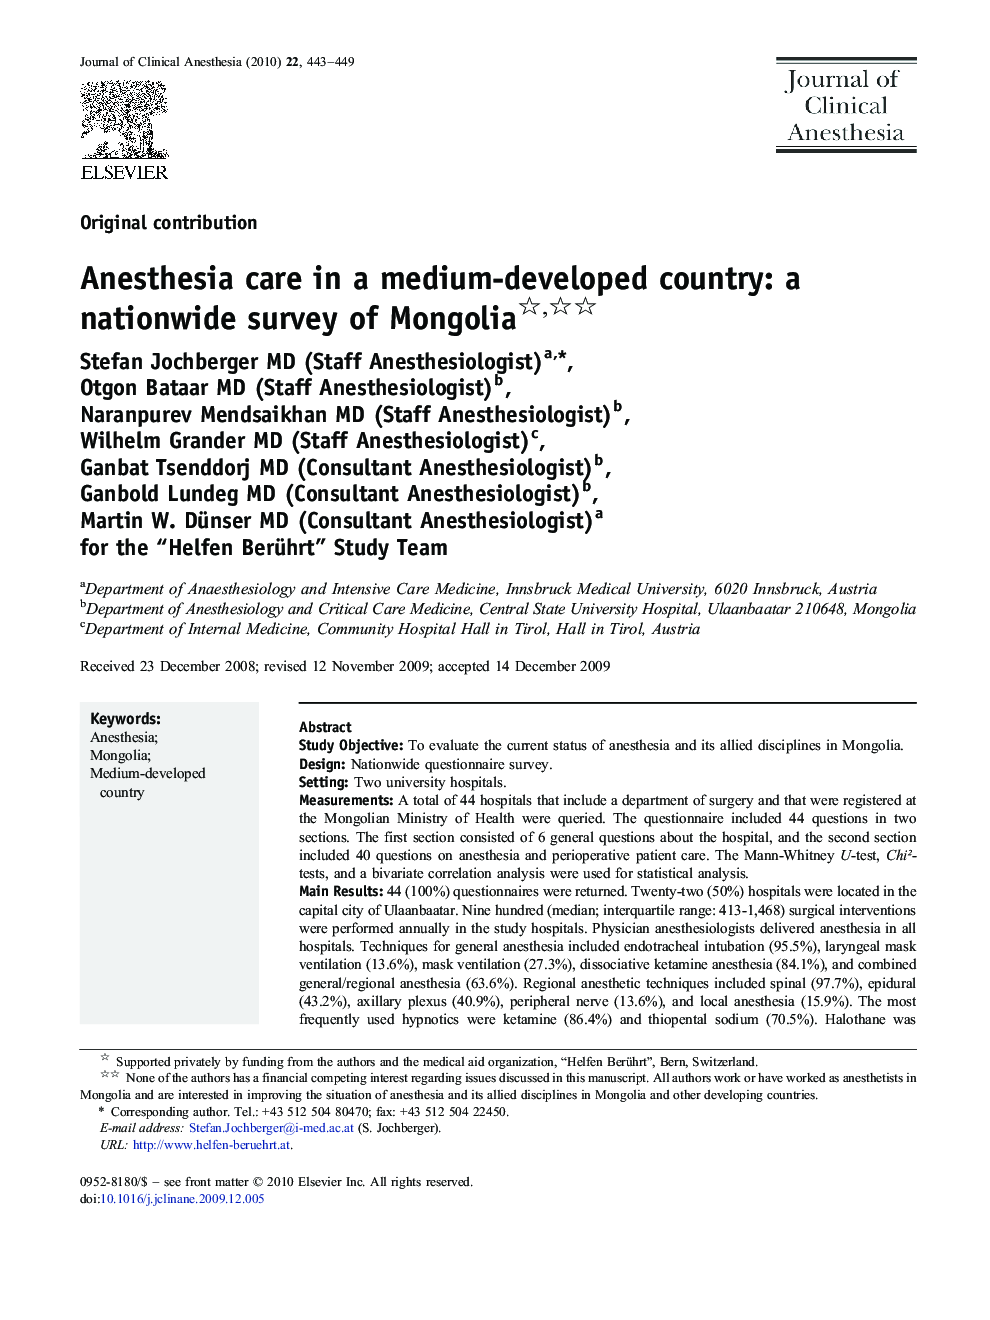 Anesthesia care in a medium-developed country: a nationwide survey of Mongolia 